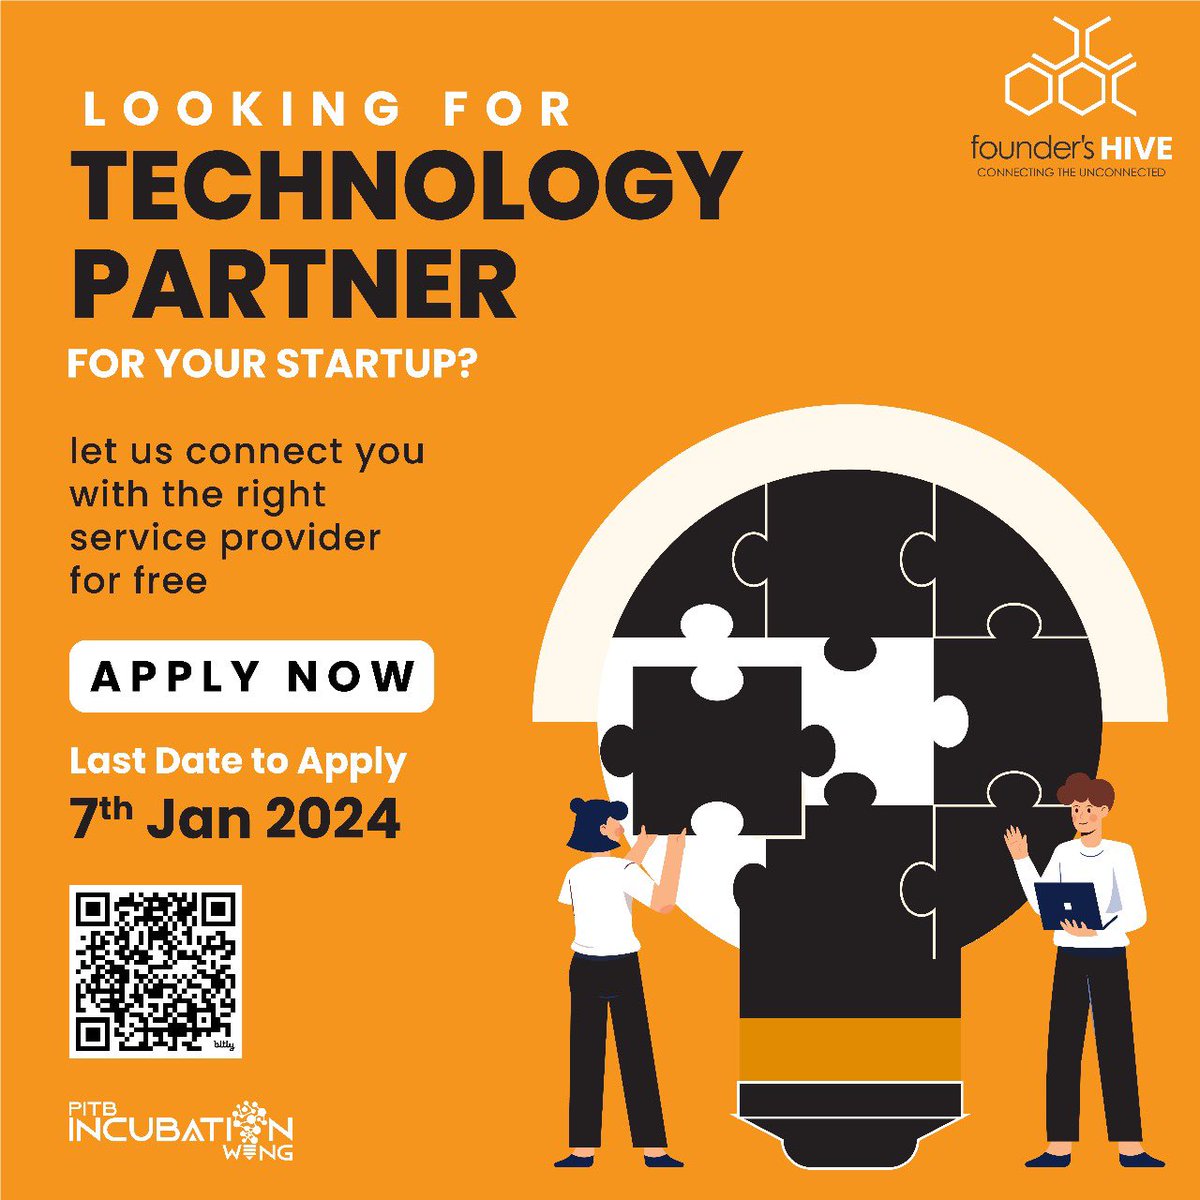 #FoundersHive Calling all entrepreneurs to join this networking event and get connected with top CTOs and software houses for to find your next tech partner. ⏰ Limited spots available - secure yours by 𝐉𝐚𝐧𝐮𝐚𝐫𝐲 𝟕𝐭𝐡. Link to register: bit.ly/4713iZe